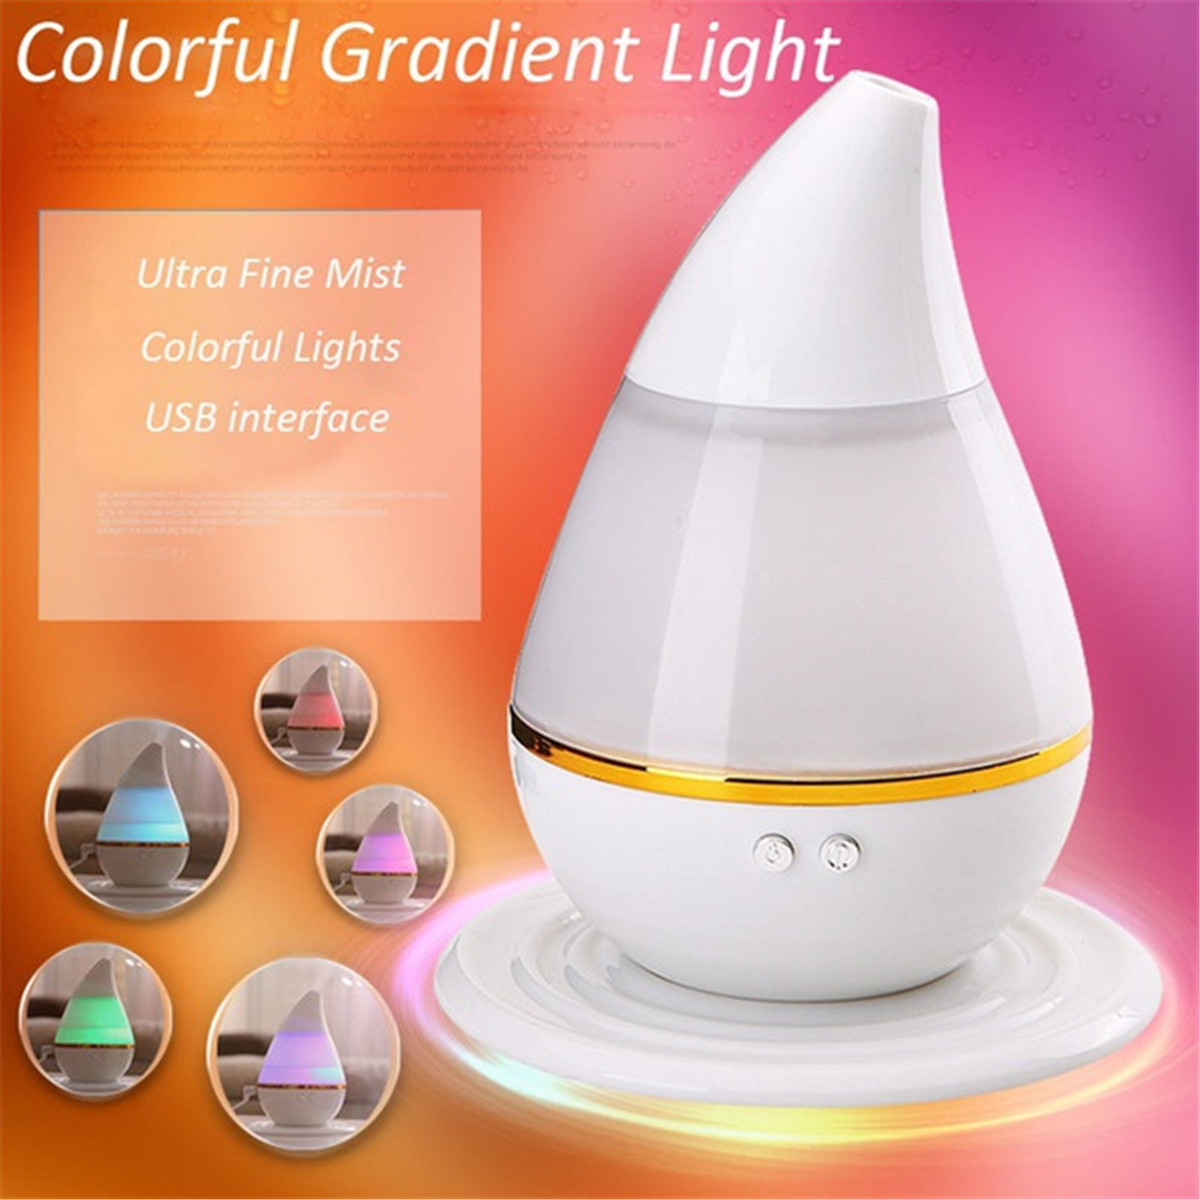 250ml-Ultrasonic-Air-Humidifier-USB-Charging-Essential-Oil-Diffuser-LED-Light-Purifier-for-Home-Offi-1787140-1